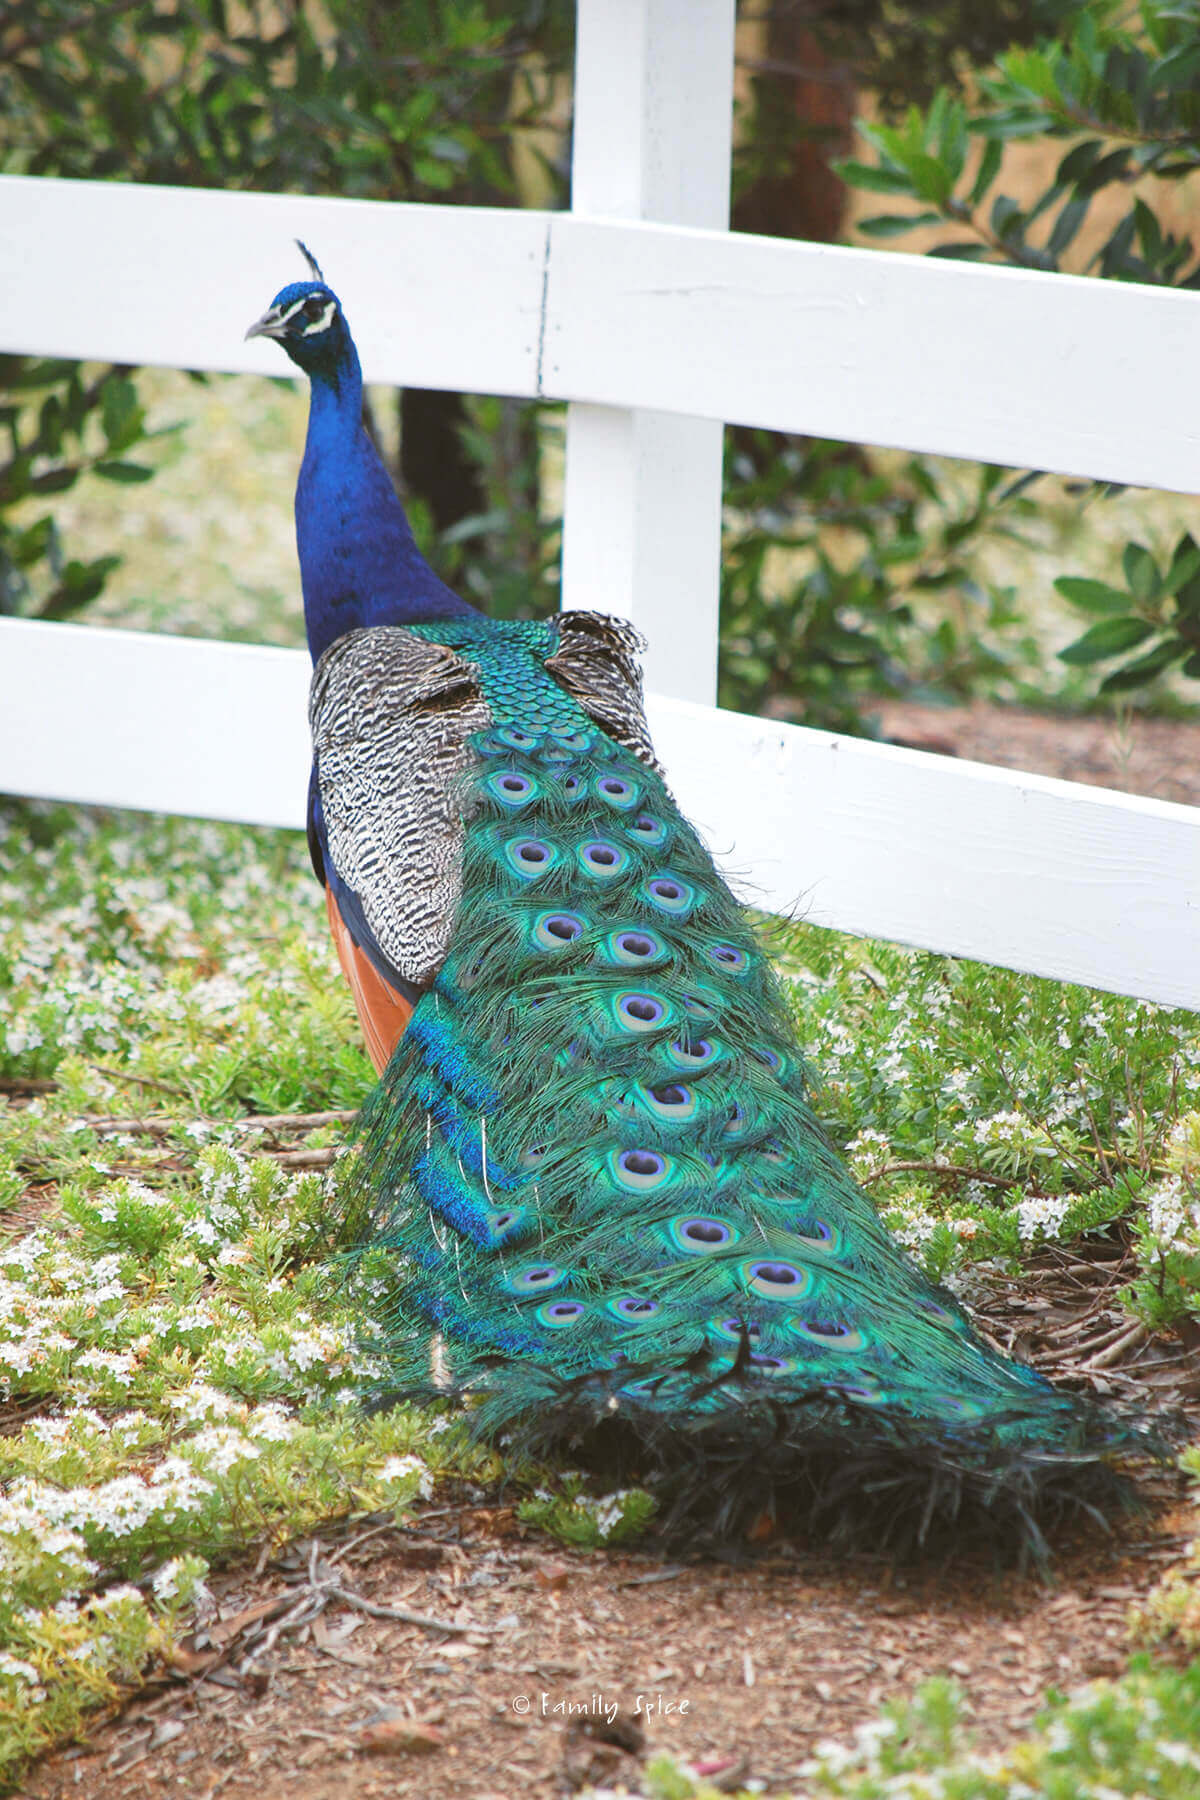 View of a peacock from the back with its tail down